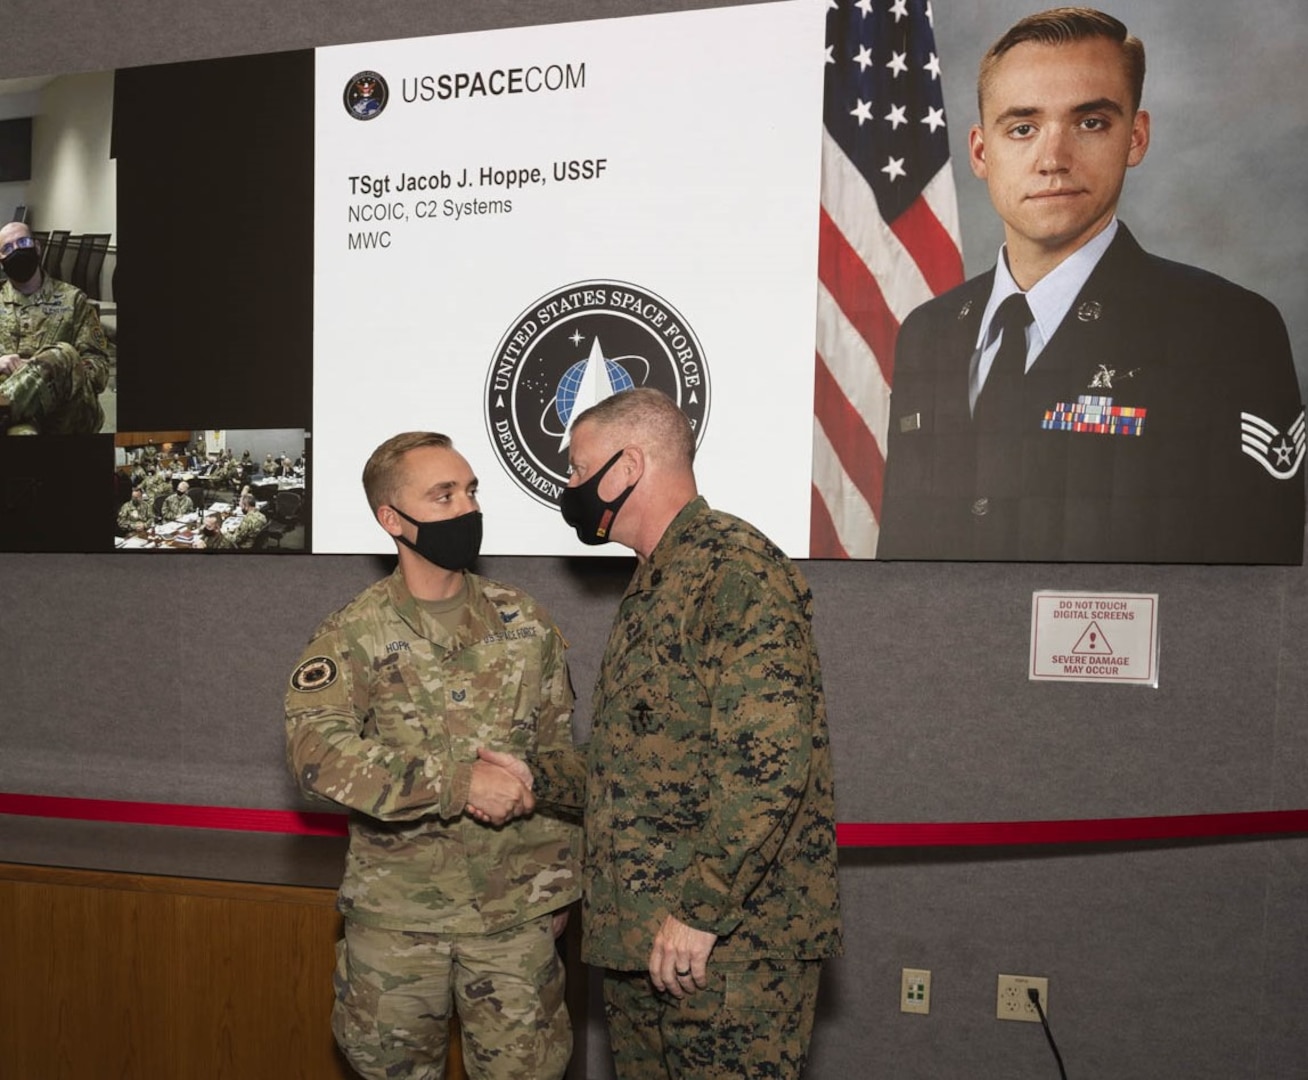 U.S. Marine Corps Master Gunnery Sgt. Scott Stalker (right), U.S. Space Command command senior enlisted leader, congratulates U.S. Space Force Tech Sgt. Jacob Hoppe (left) of the Combined Force Space Component Command’s Missile Warning Center as a “Star of USSPACECOM” on Oct. 28, 2021, at the 2021 Fall Commander’s Conference at Peterson Space Force Base, Colorado. U.S. Army Gen. James Dickinson, USSPACECOM commander, and Stalker recognized personnel across the command, its service components and subordinate units. One of USSPACECOM’s priorities is developing warfighters who understand the threats in all domains — air, land, sea, cyber and space — so they can respond decisively.